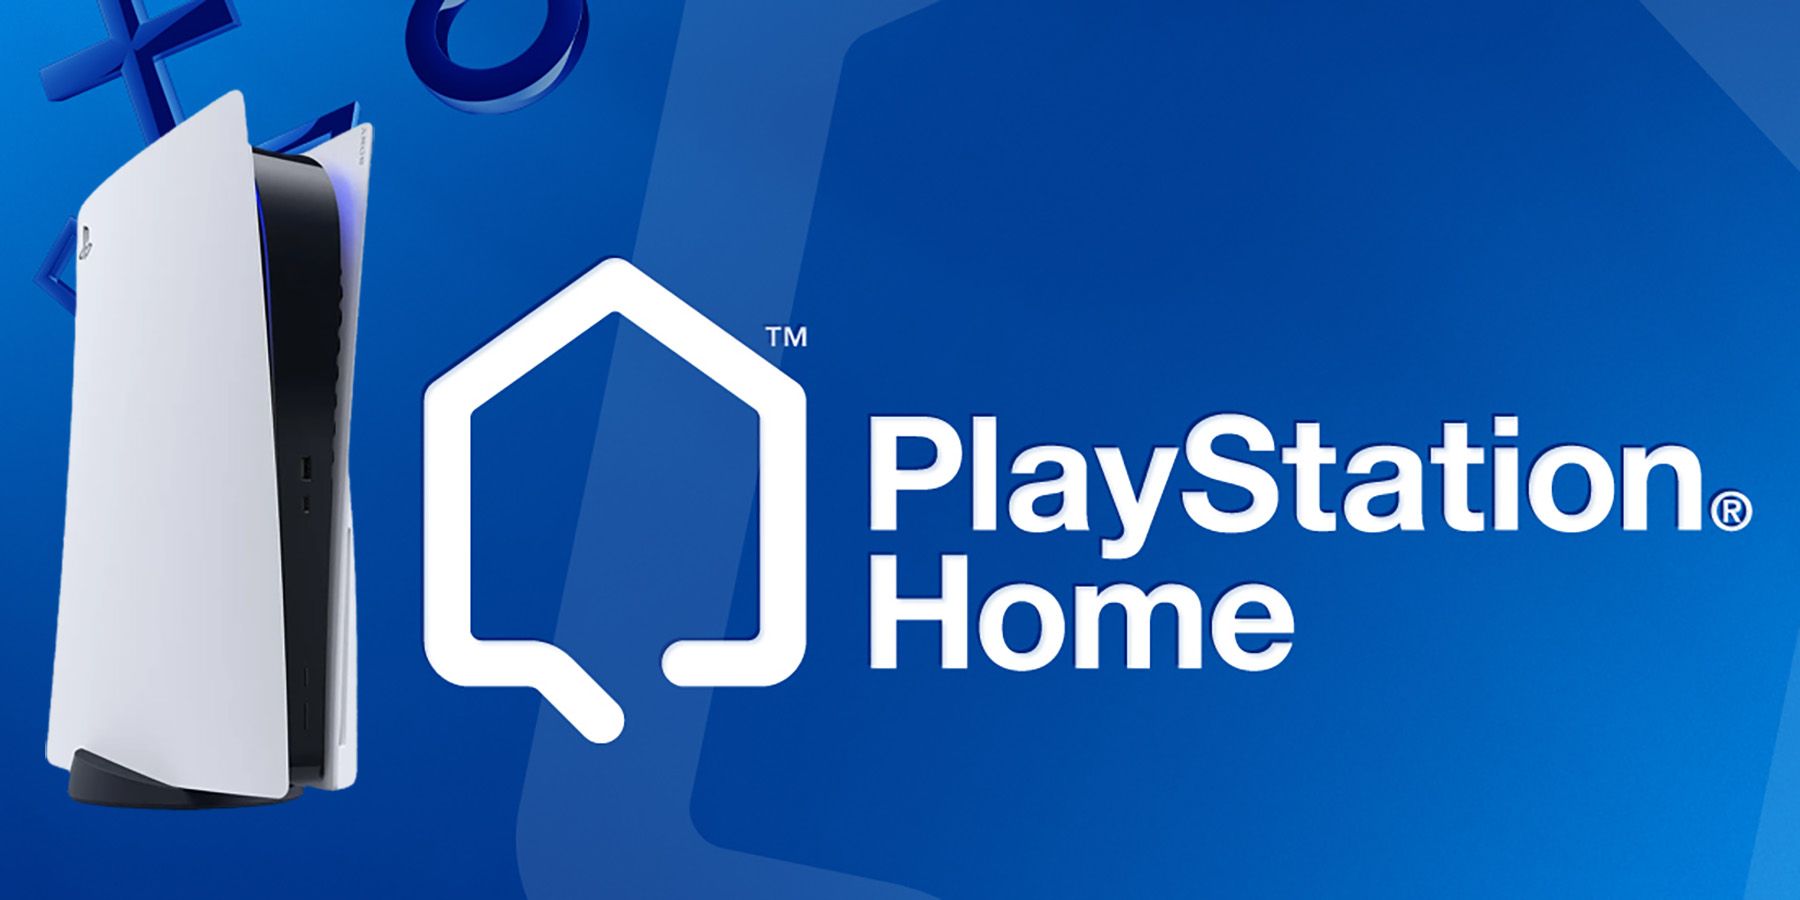 playstation home logo with a ps5 next to it